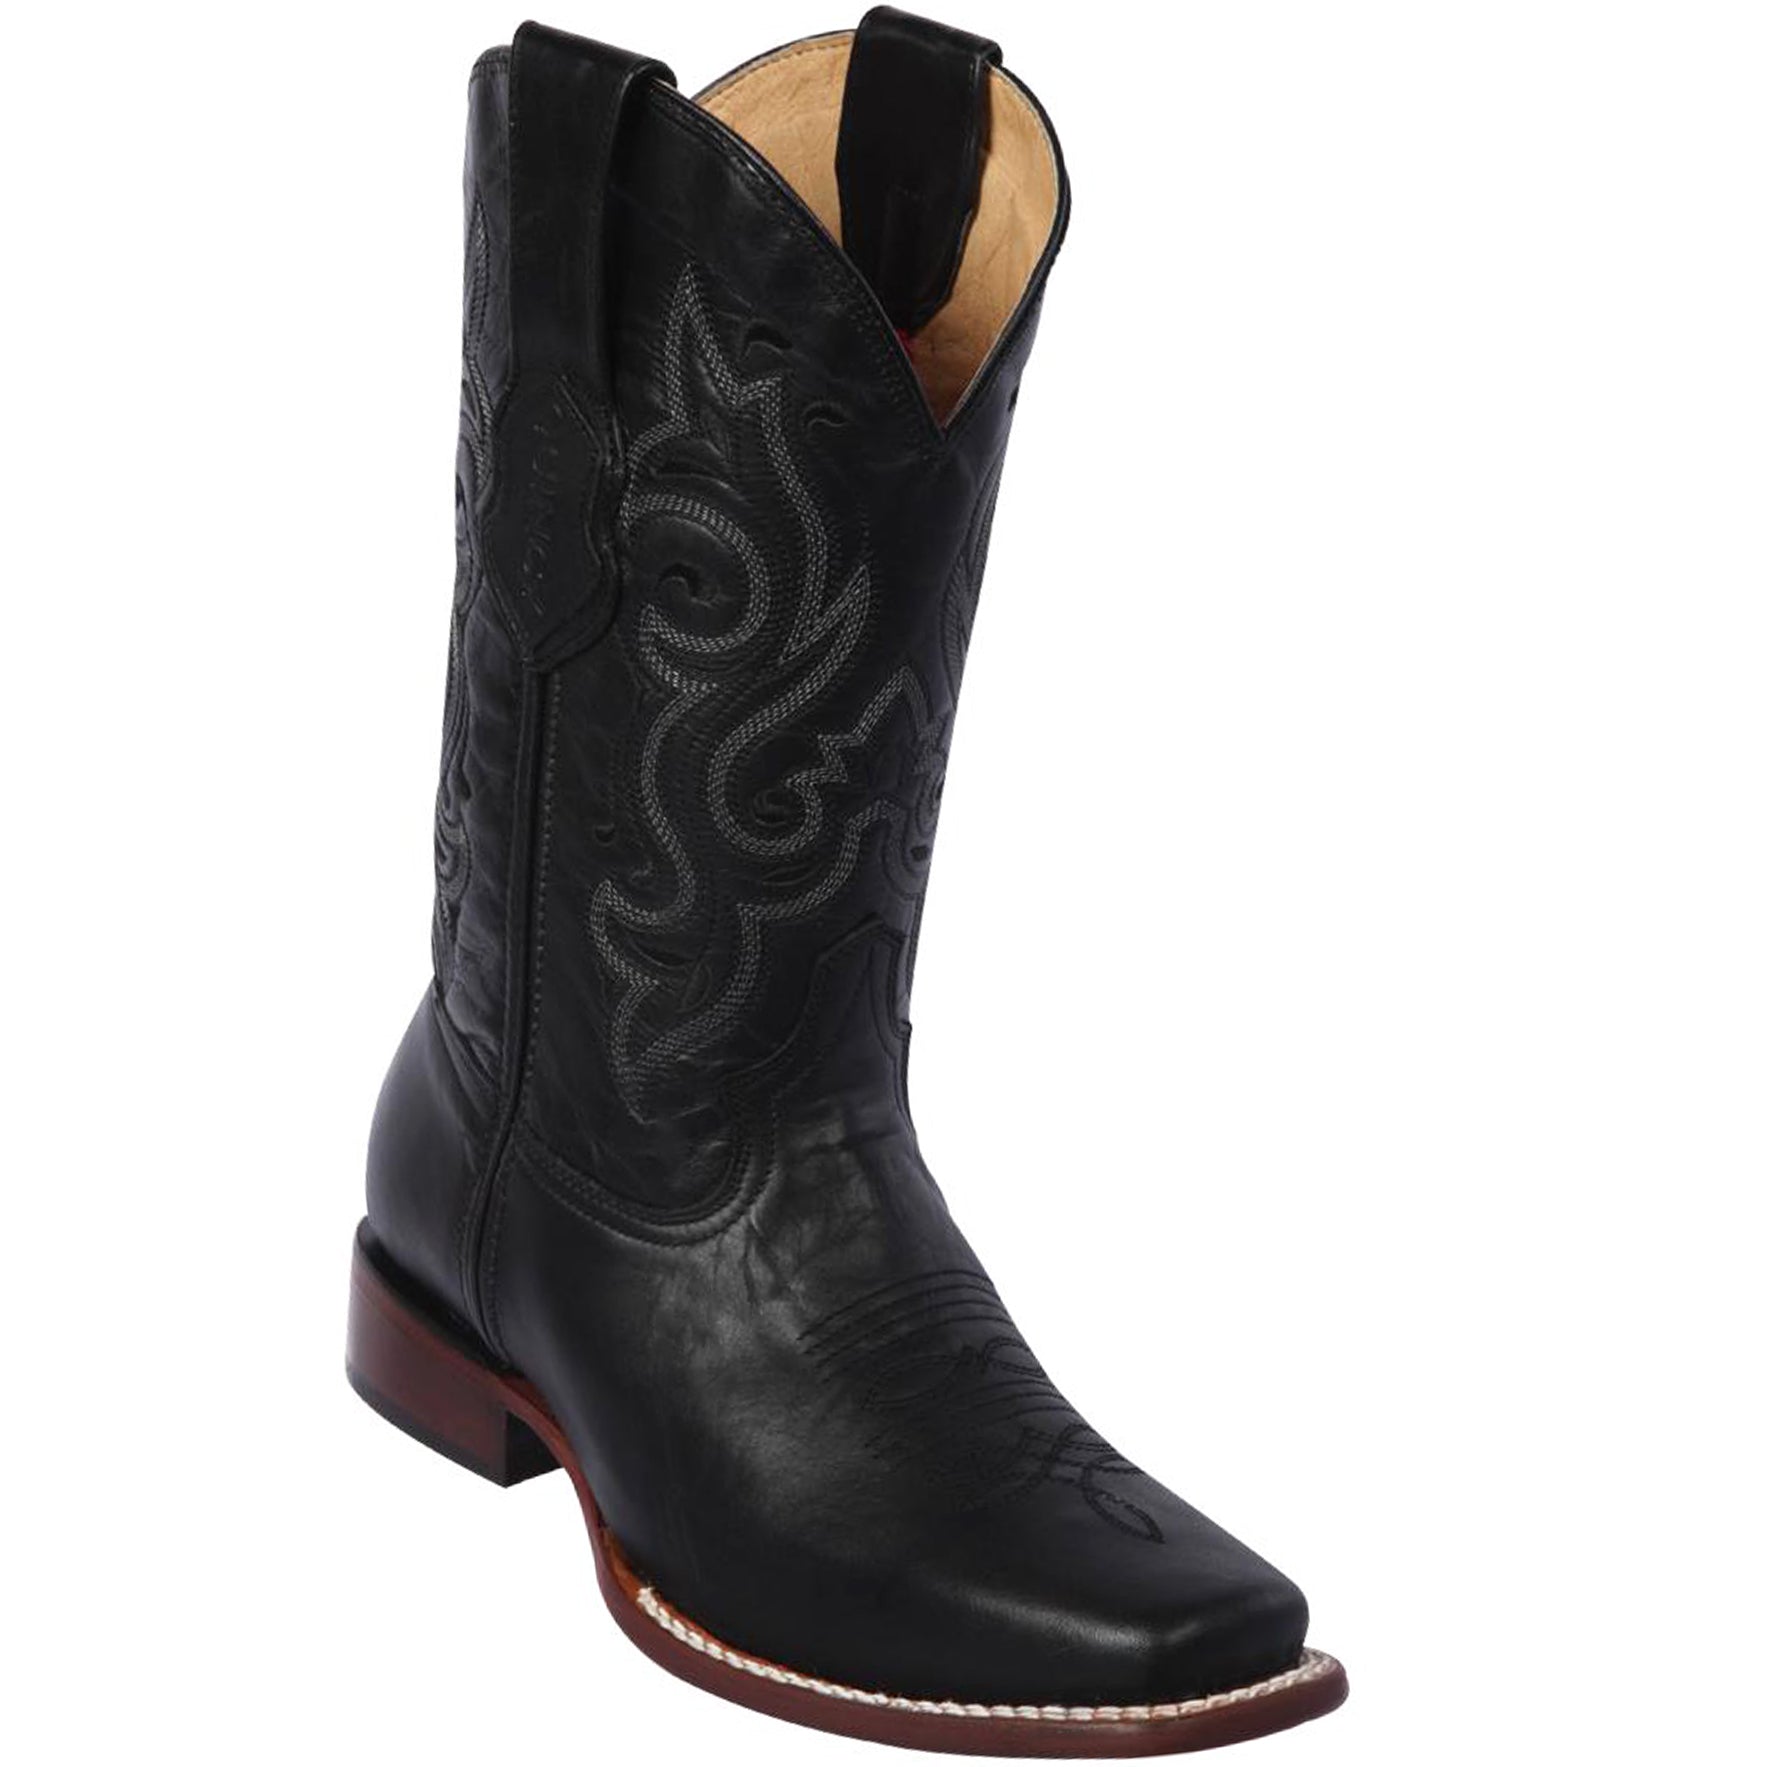 Image of Black Square Toe Cowboy Boots.